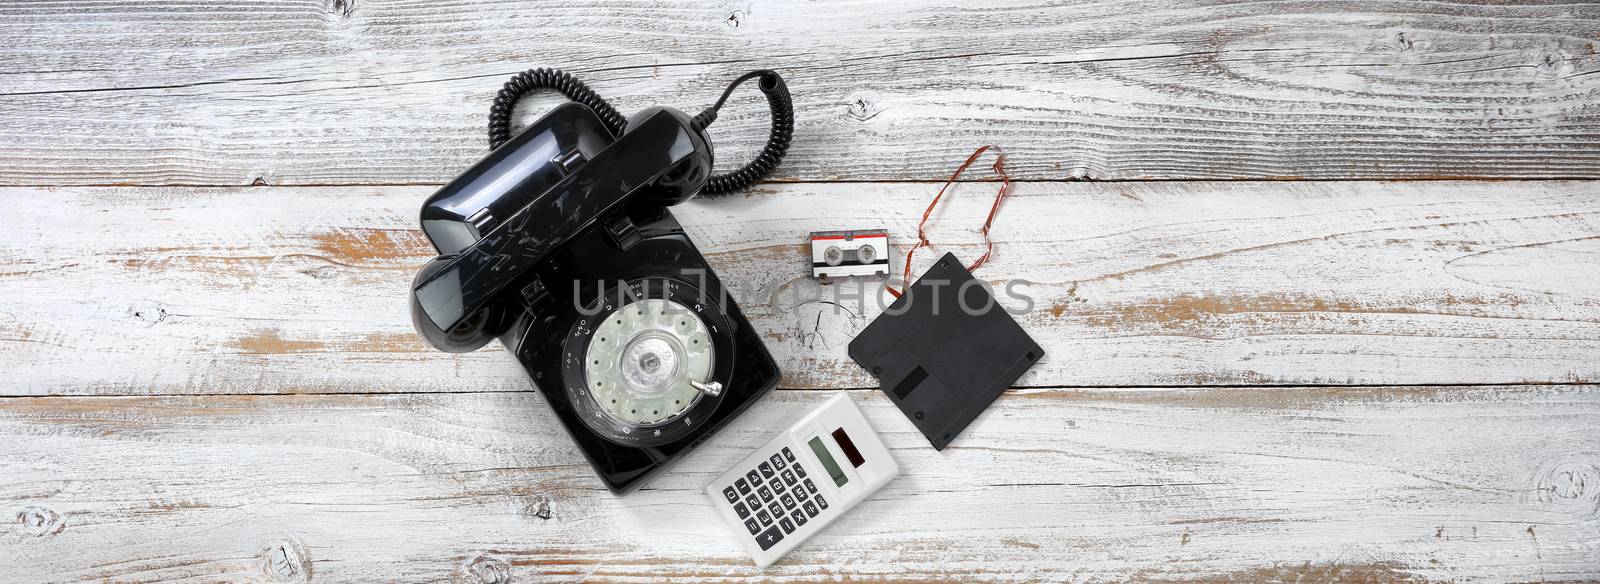 Vintage technology includes rotary dial phone and old data storage devices